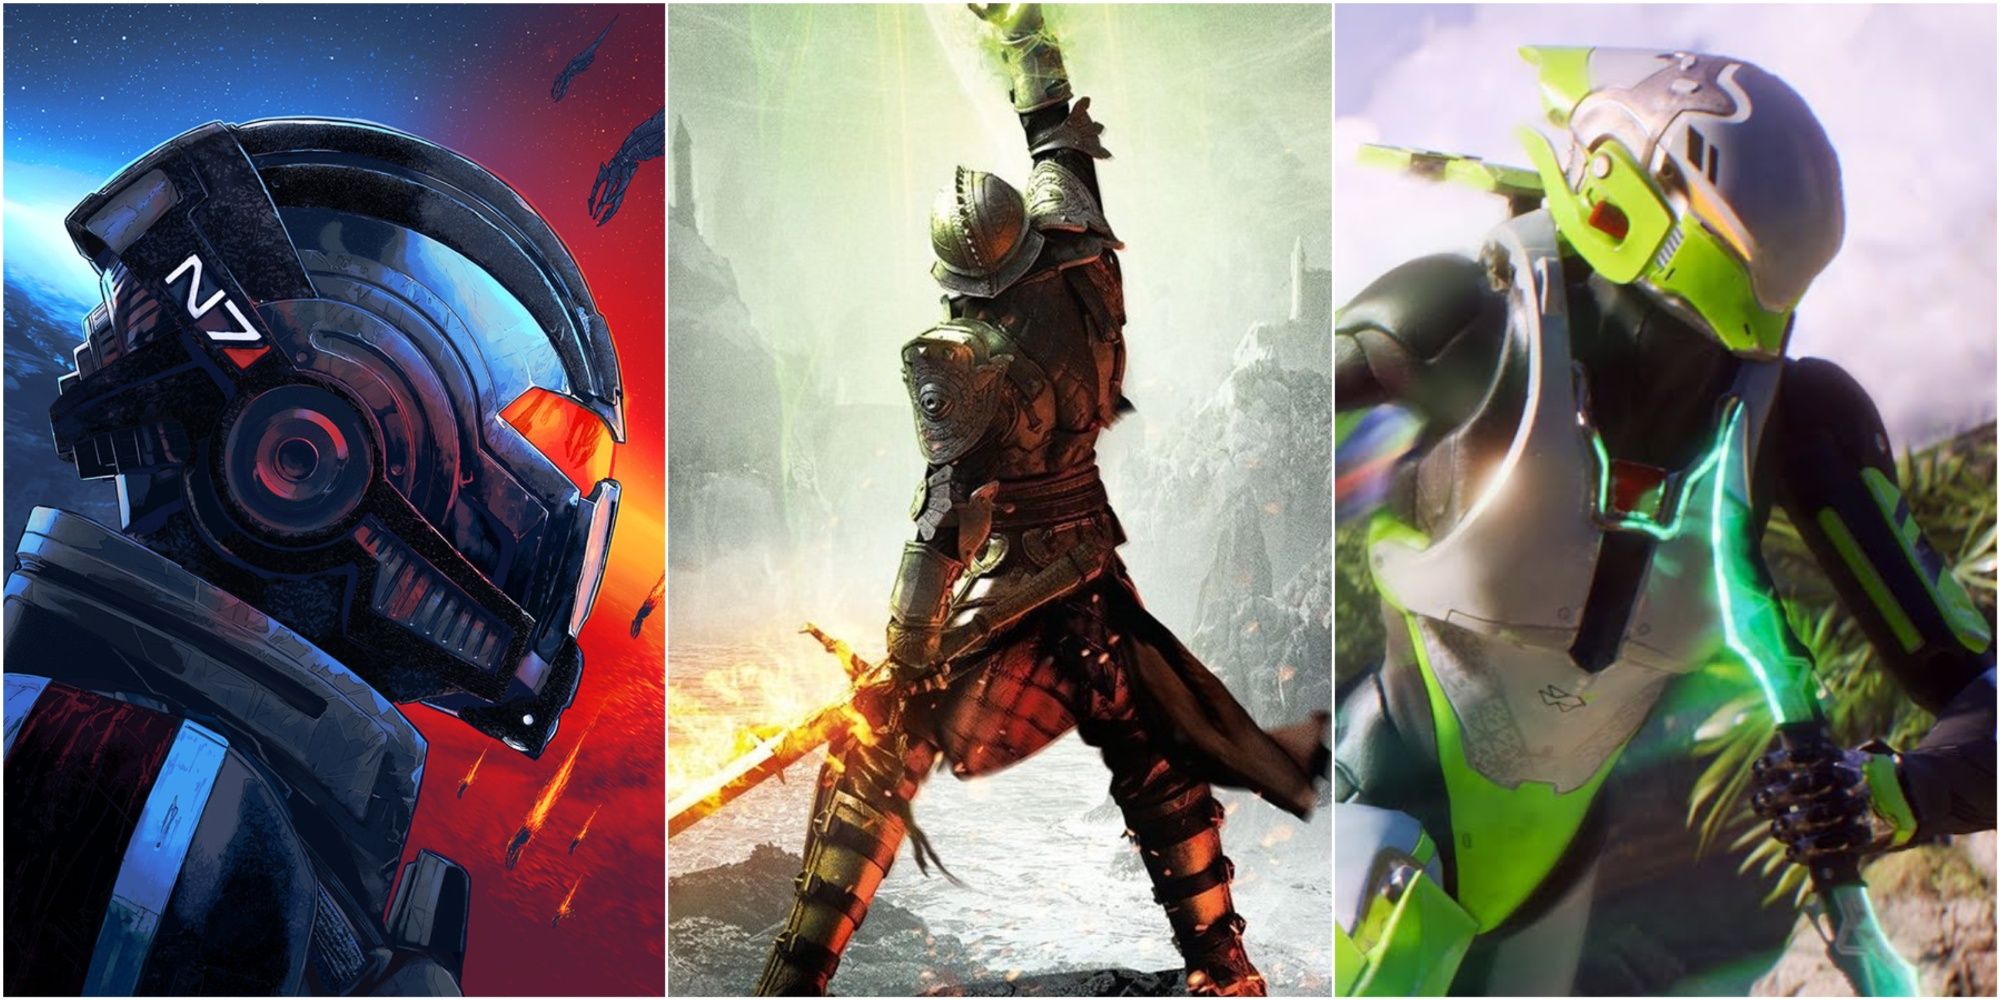 Cover Images Of Mass Effect Legendary Edition, Dragon Age Inquisiton, And Anthem